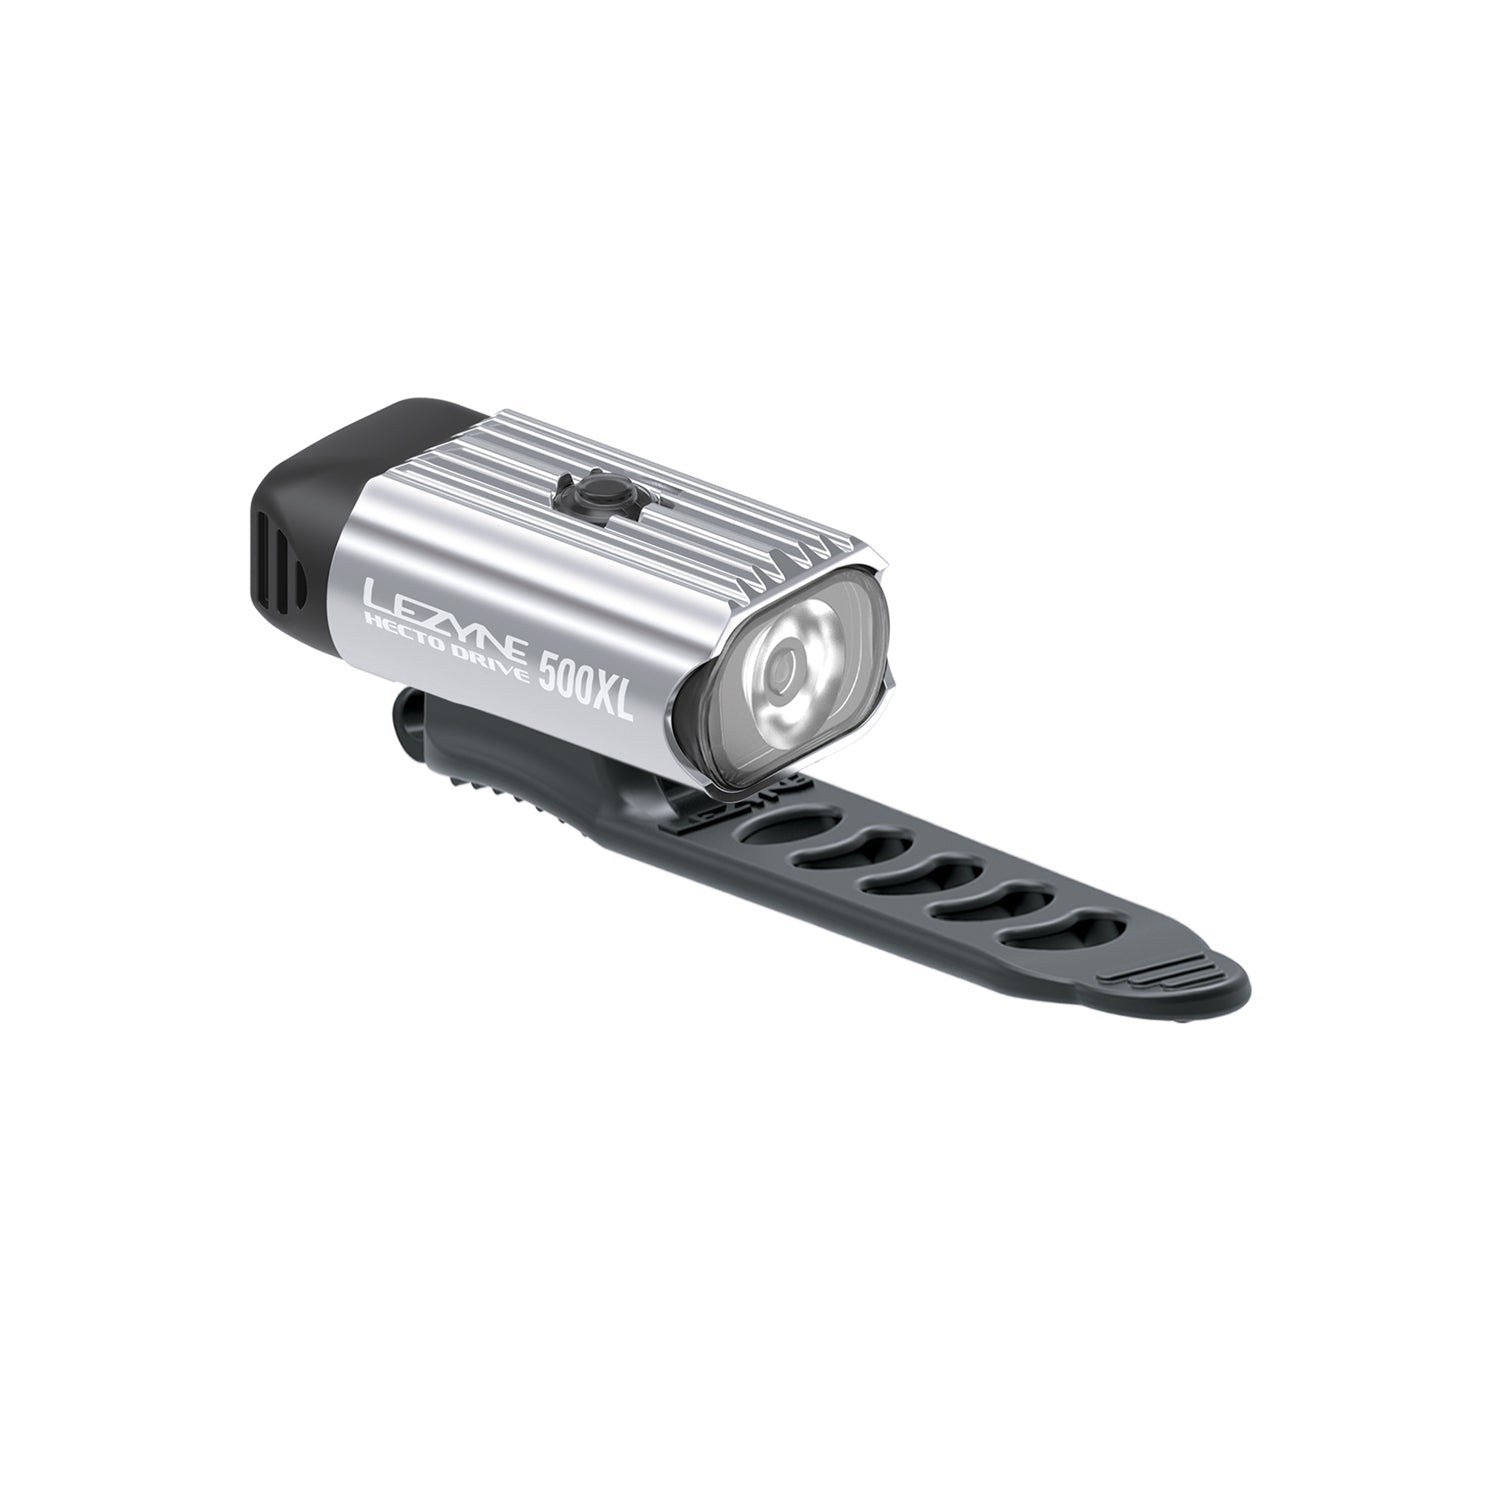 Silver Hecto Drive 500XL front bike light